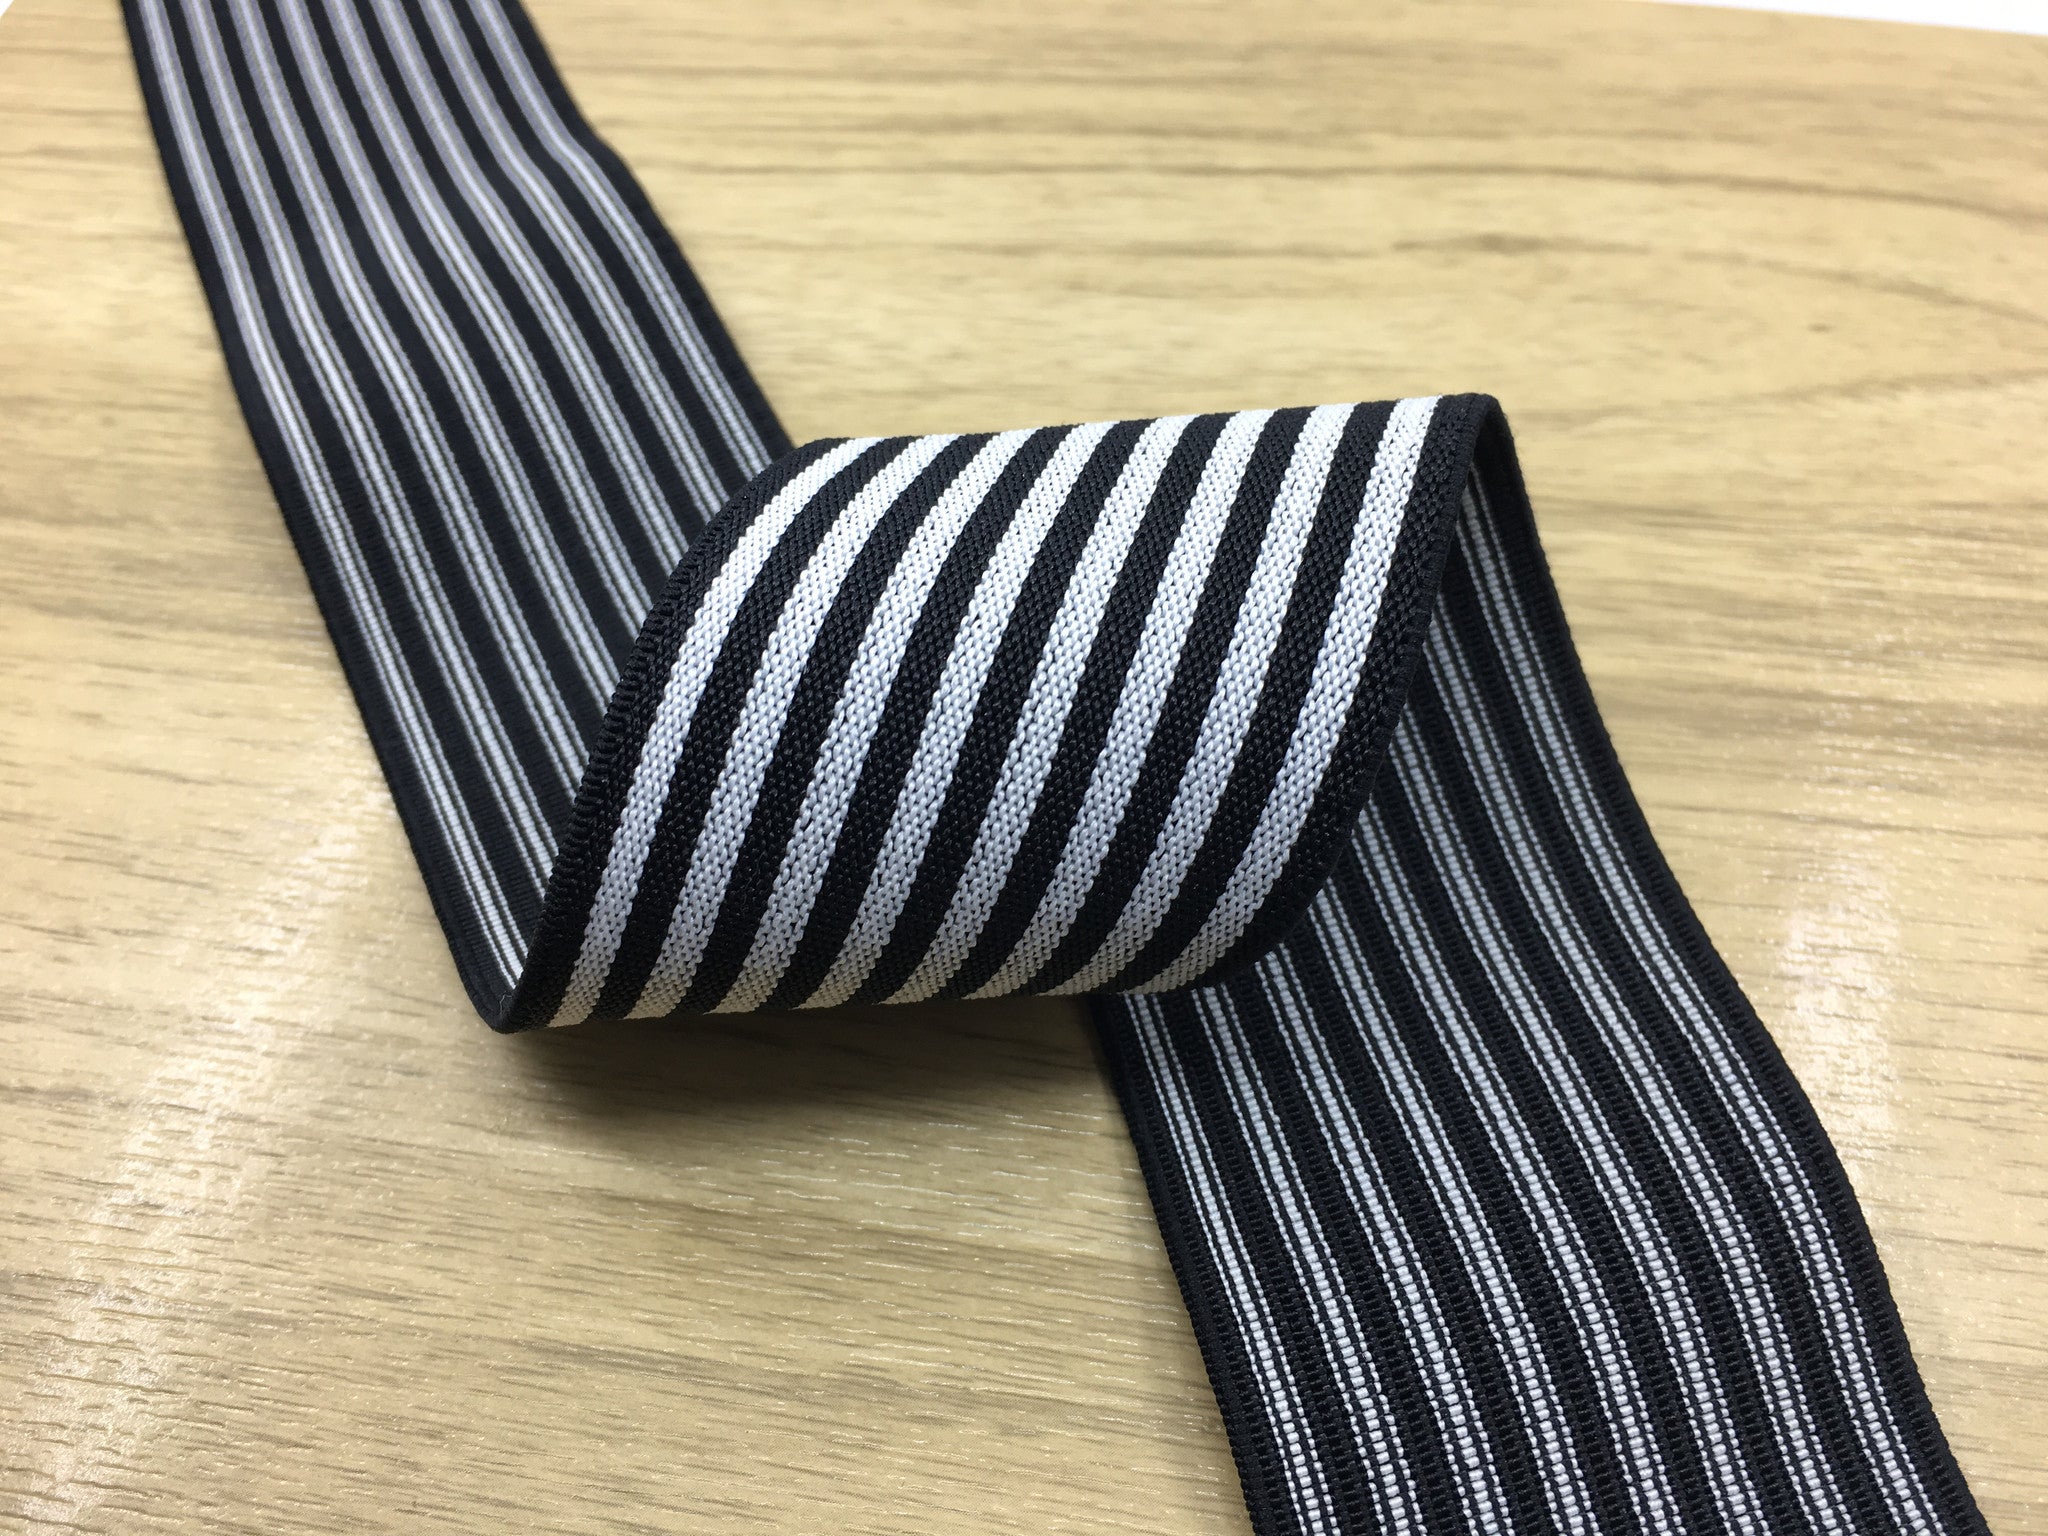 2 inch (50 mm ) Wide Colored Black and White Thin Striped Elastic Band, Waistband Elastic, Sewing Elastic-1 Yard - strapcrafts